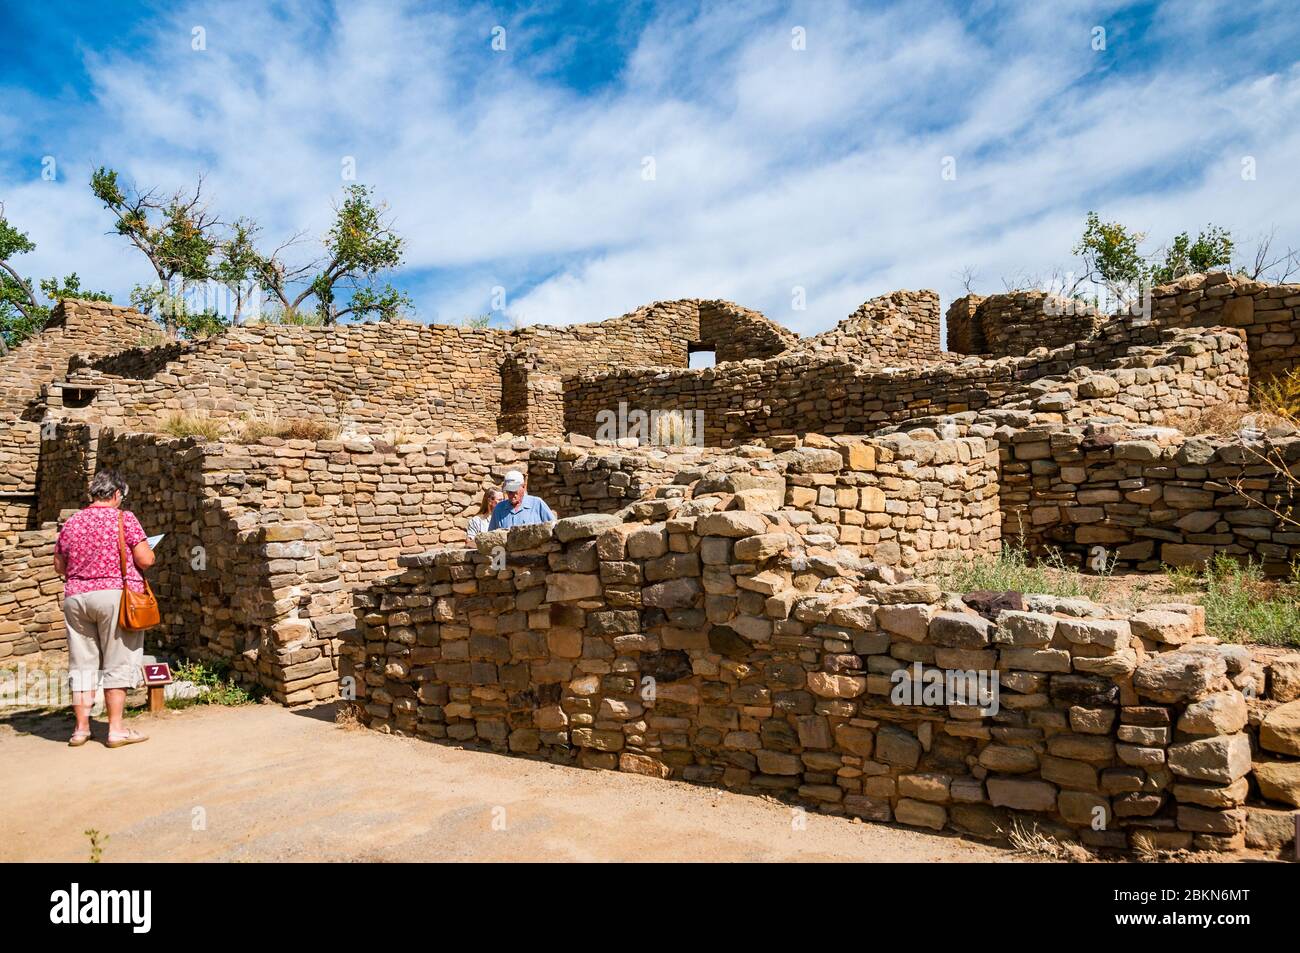 Ancient Pueoblan ruins at Aztec, New Mexico dating back over 700 years. Stock Photo